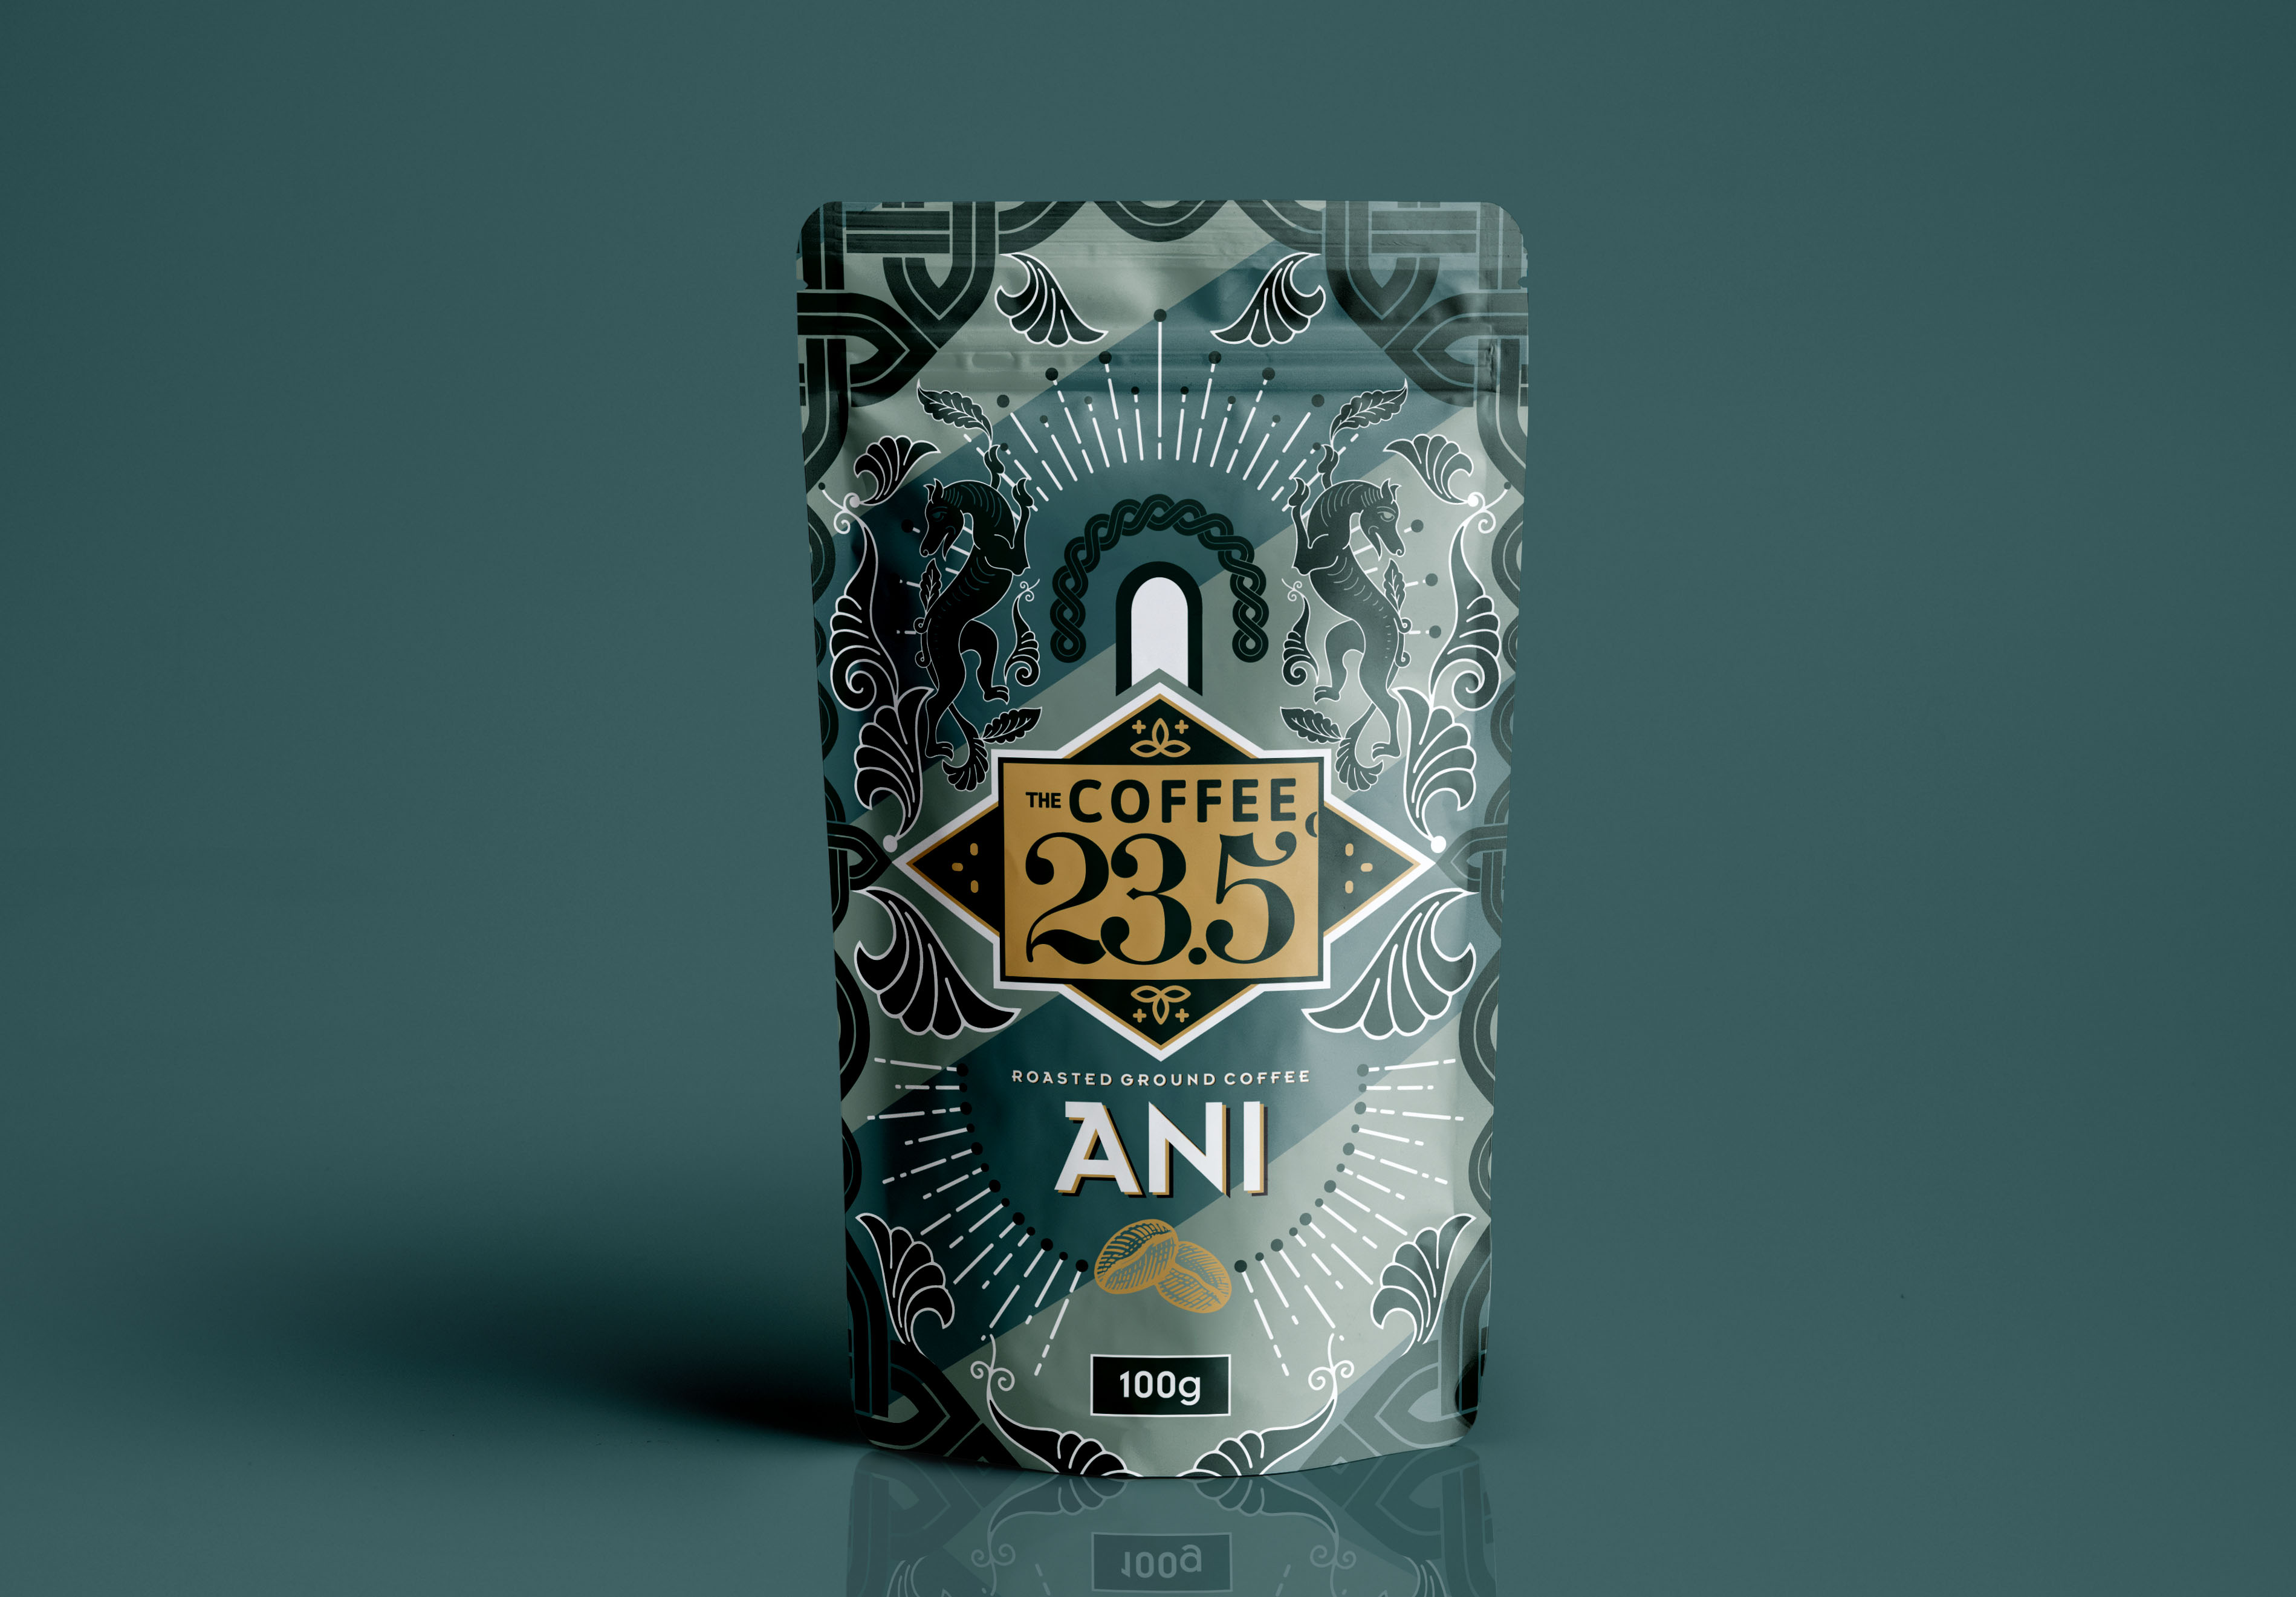 Rebrand for The Coffee 23,5° Coffeehouse